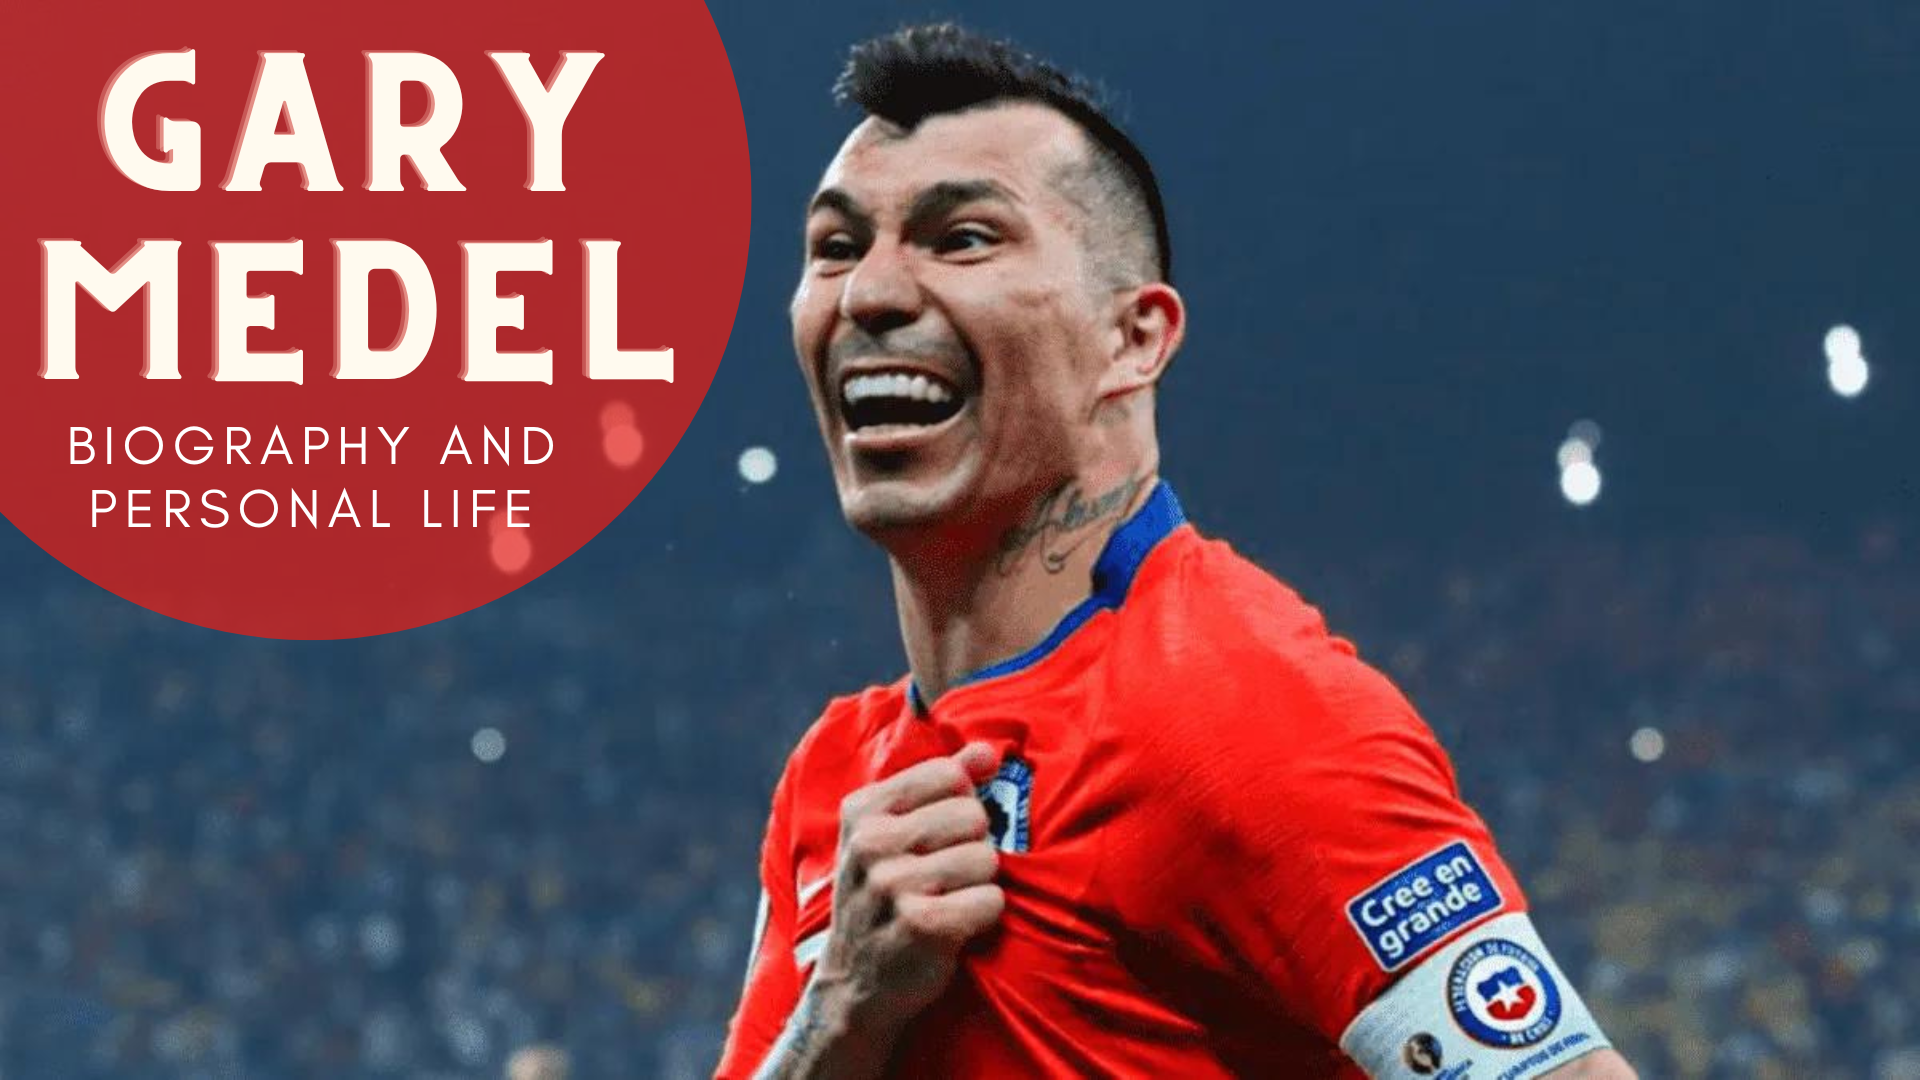 Gary Medel smiling and wearing red uniform with words Gary Medel Biography And Personal Life